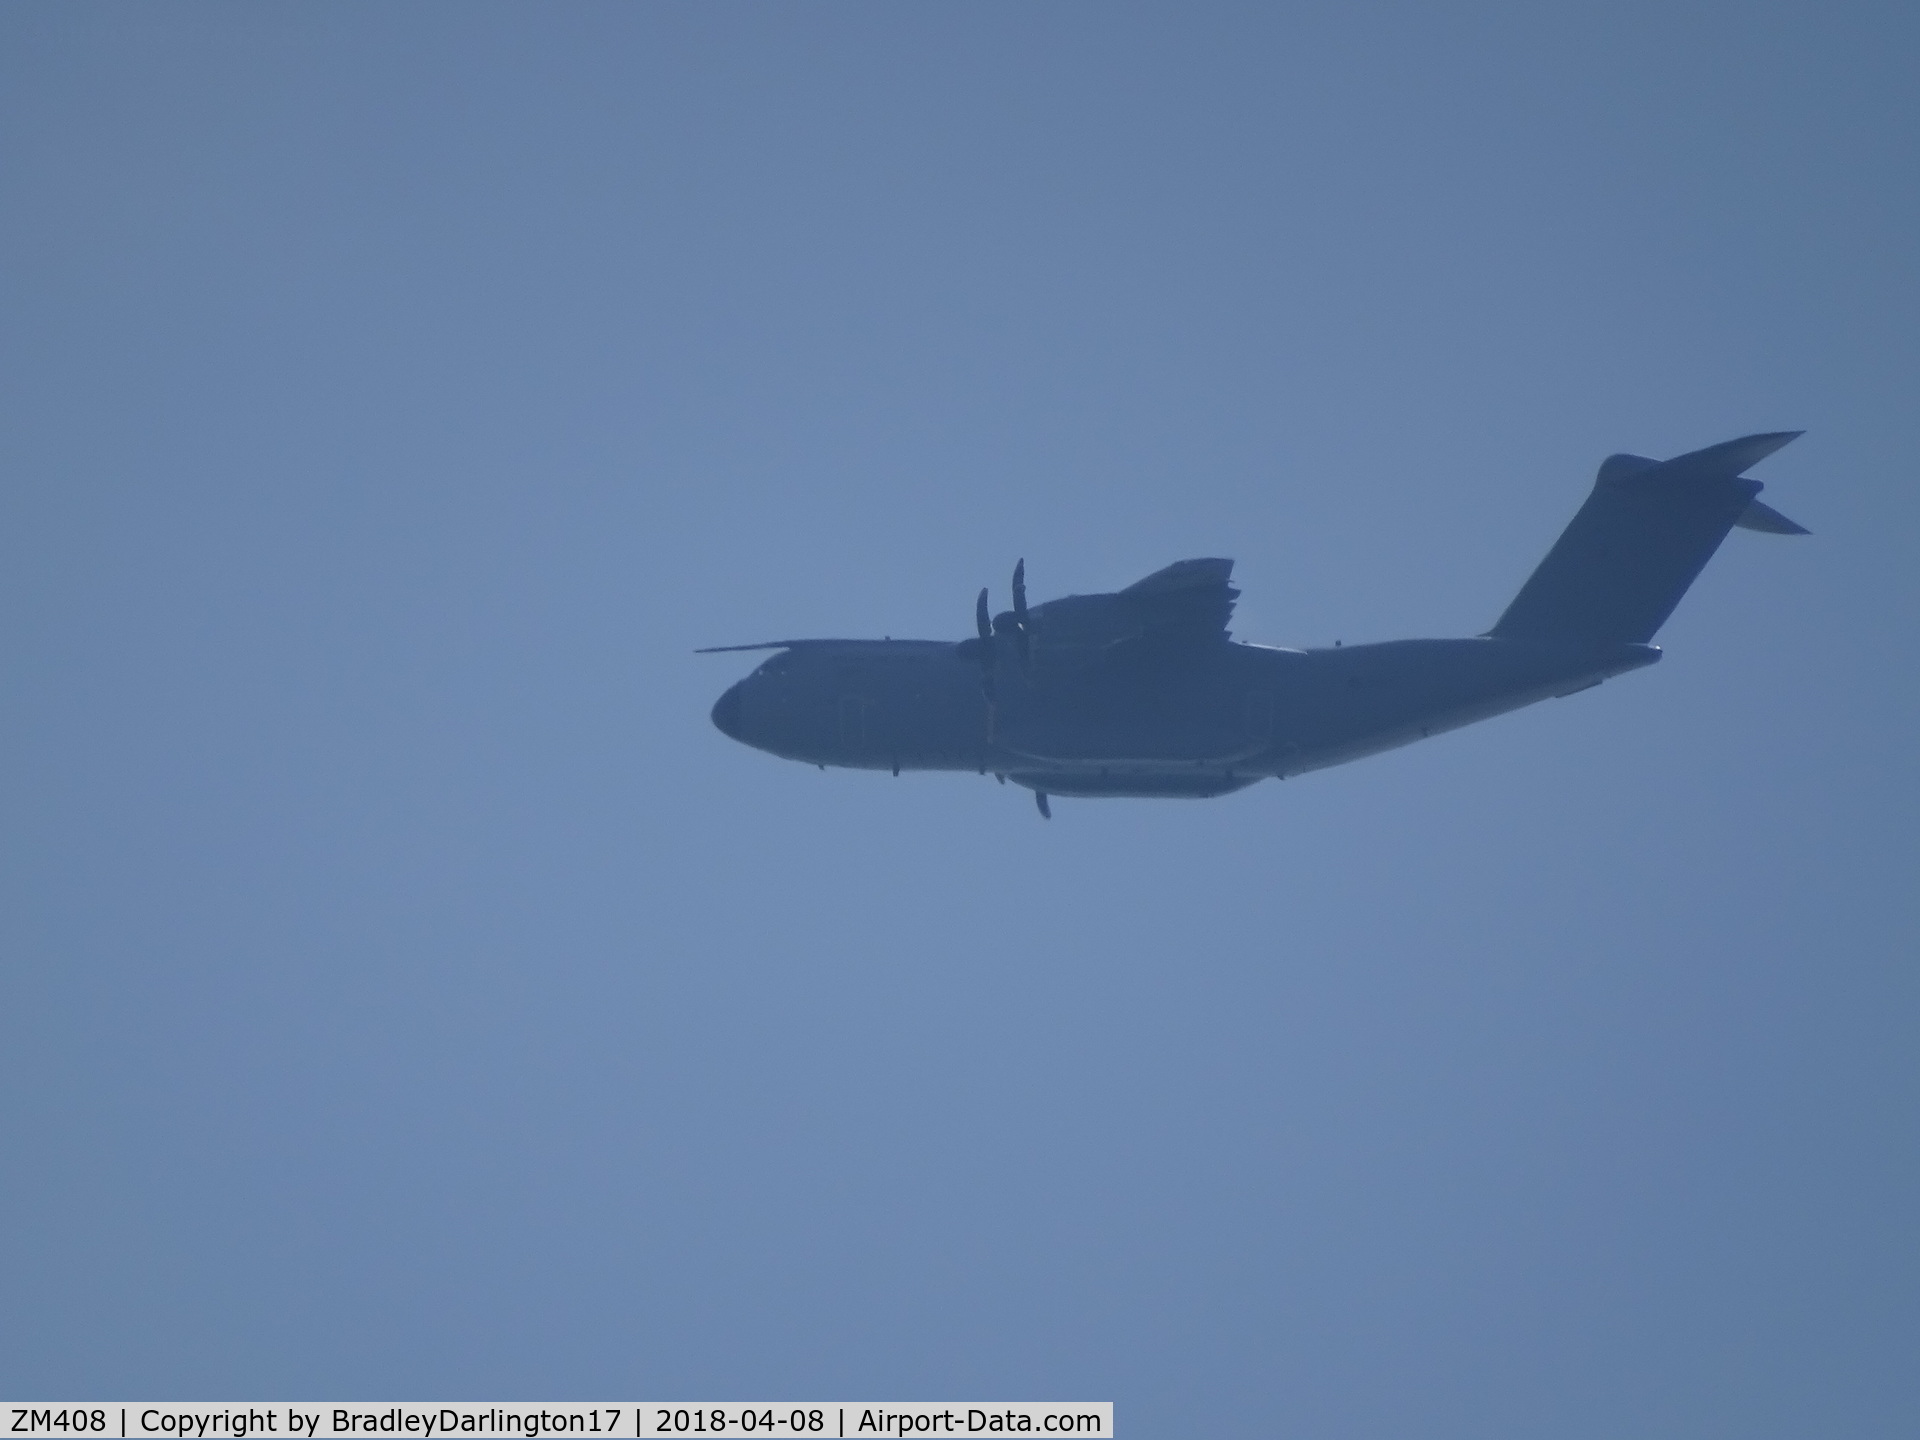 ZM408, 2015 Airbus A400M Atlas C.1 C/N 027, ZM408 flying low over plymouth hoe during training